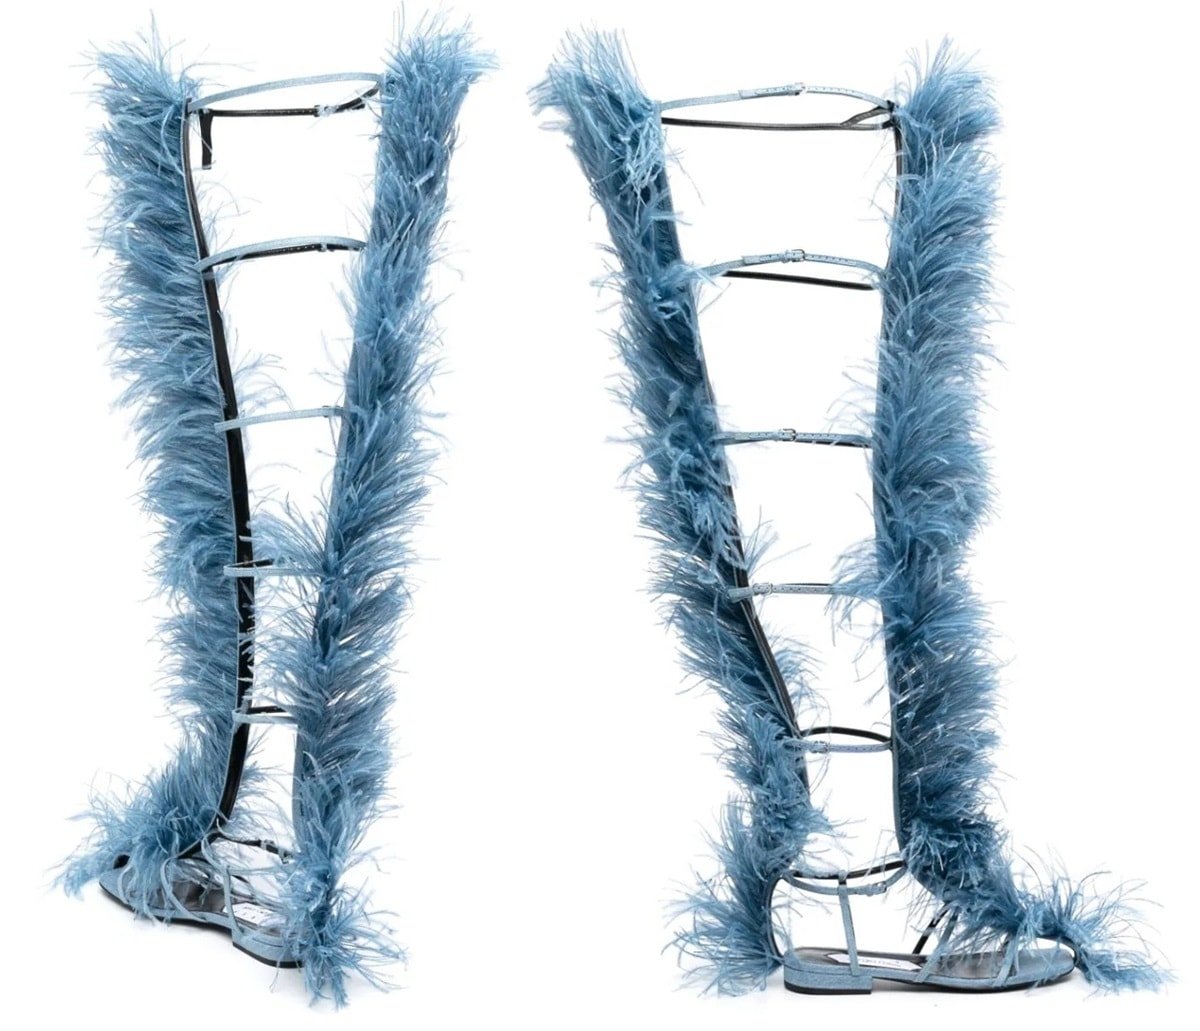 Adorned with vibrant blue feathers, these sandals showcase a high gladiator-inspired silhouette